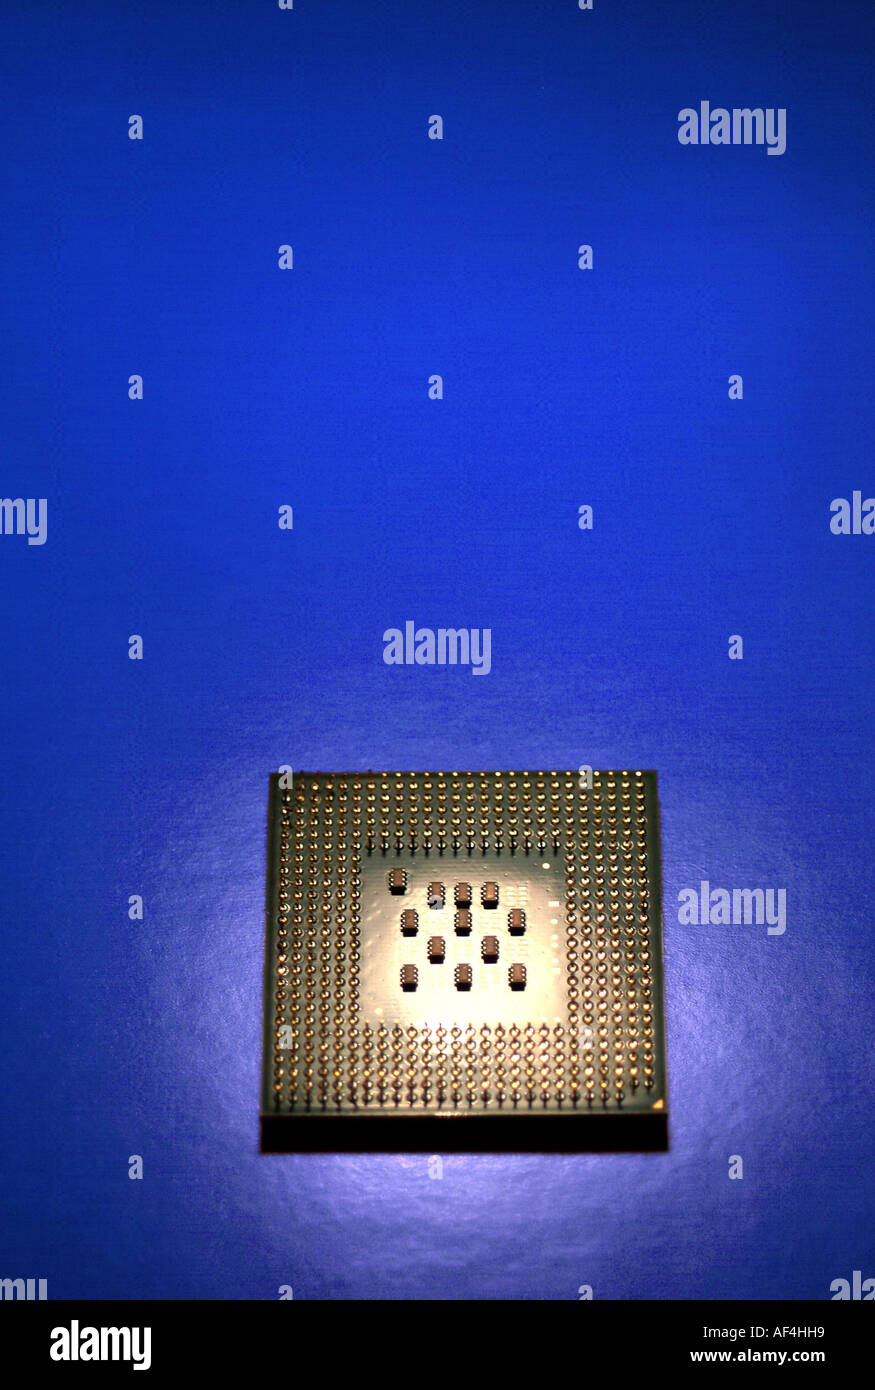 computerprocessor with blue background Stock Photo